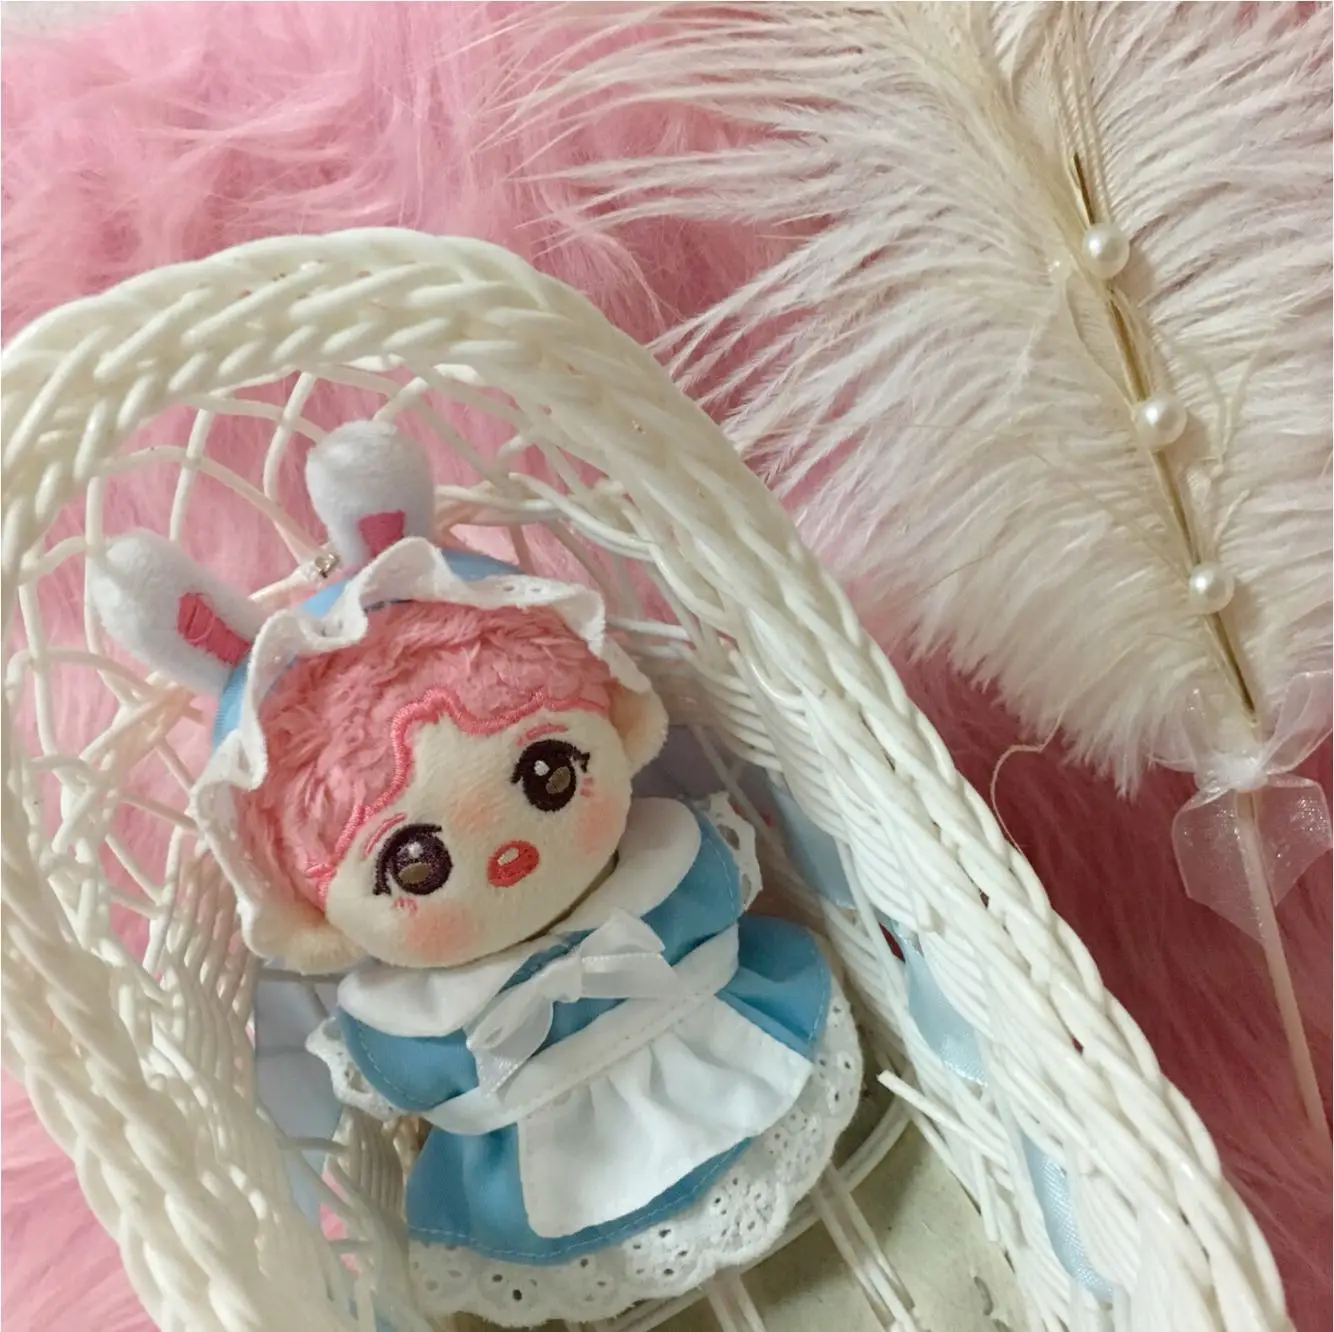 10cm starfish doll clothes maid star doll clothes doll not for sale - $17.48